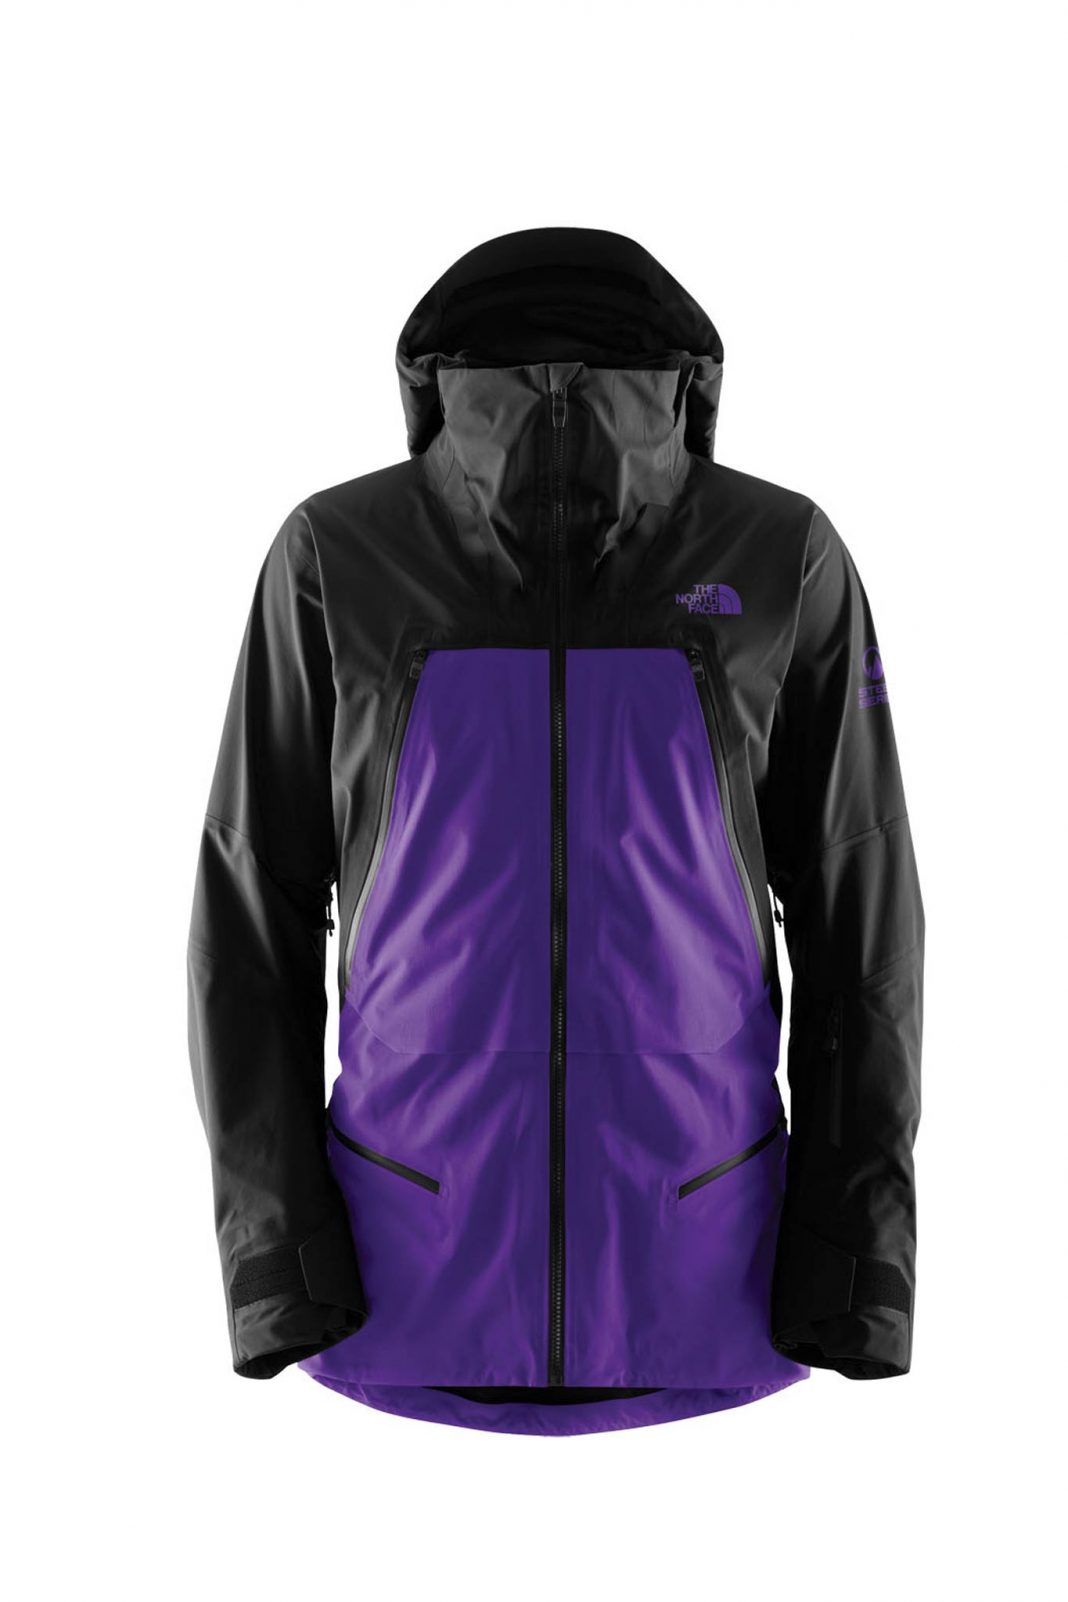 The North Face: Purist Jacket 18/19